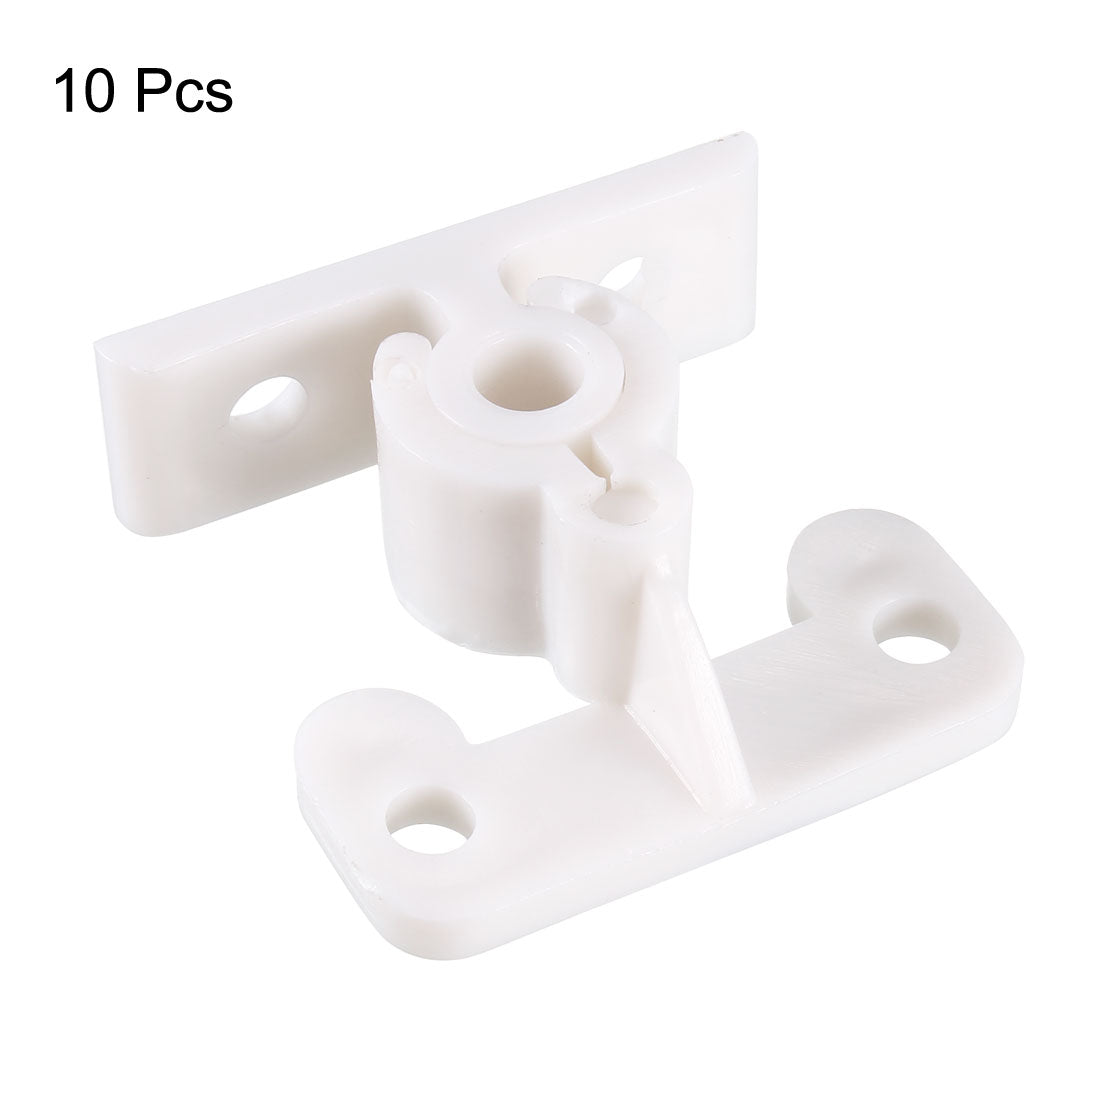 uxcell Uxcell Furniture Cabinet Door Plastic Friction Catch Non-Adjustable ABS Plastic White 10Pcs